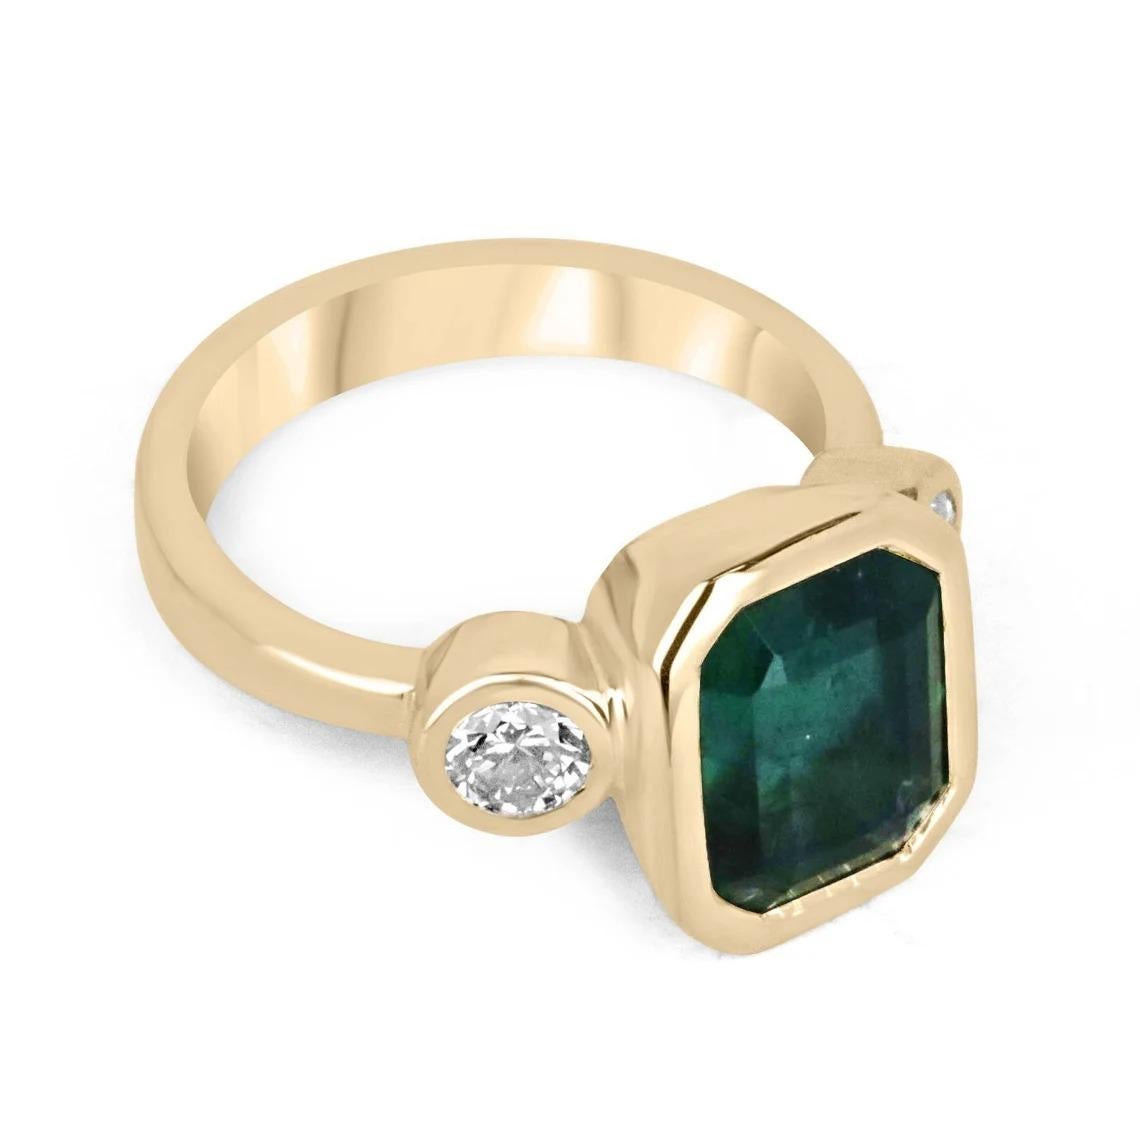 This breathtaking three-stone engagement ring boasts a stunning 3.59-carat emerald-cut emerald as its centerpiece, positioned vertically in a north-to-south orientation. The emerald showcases a deep alpine green color with unique characteristics